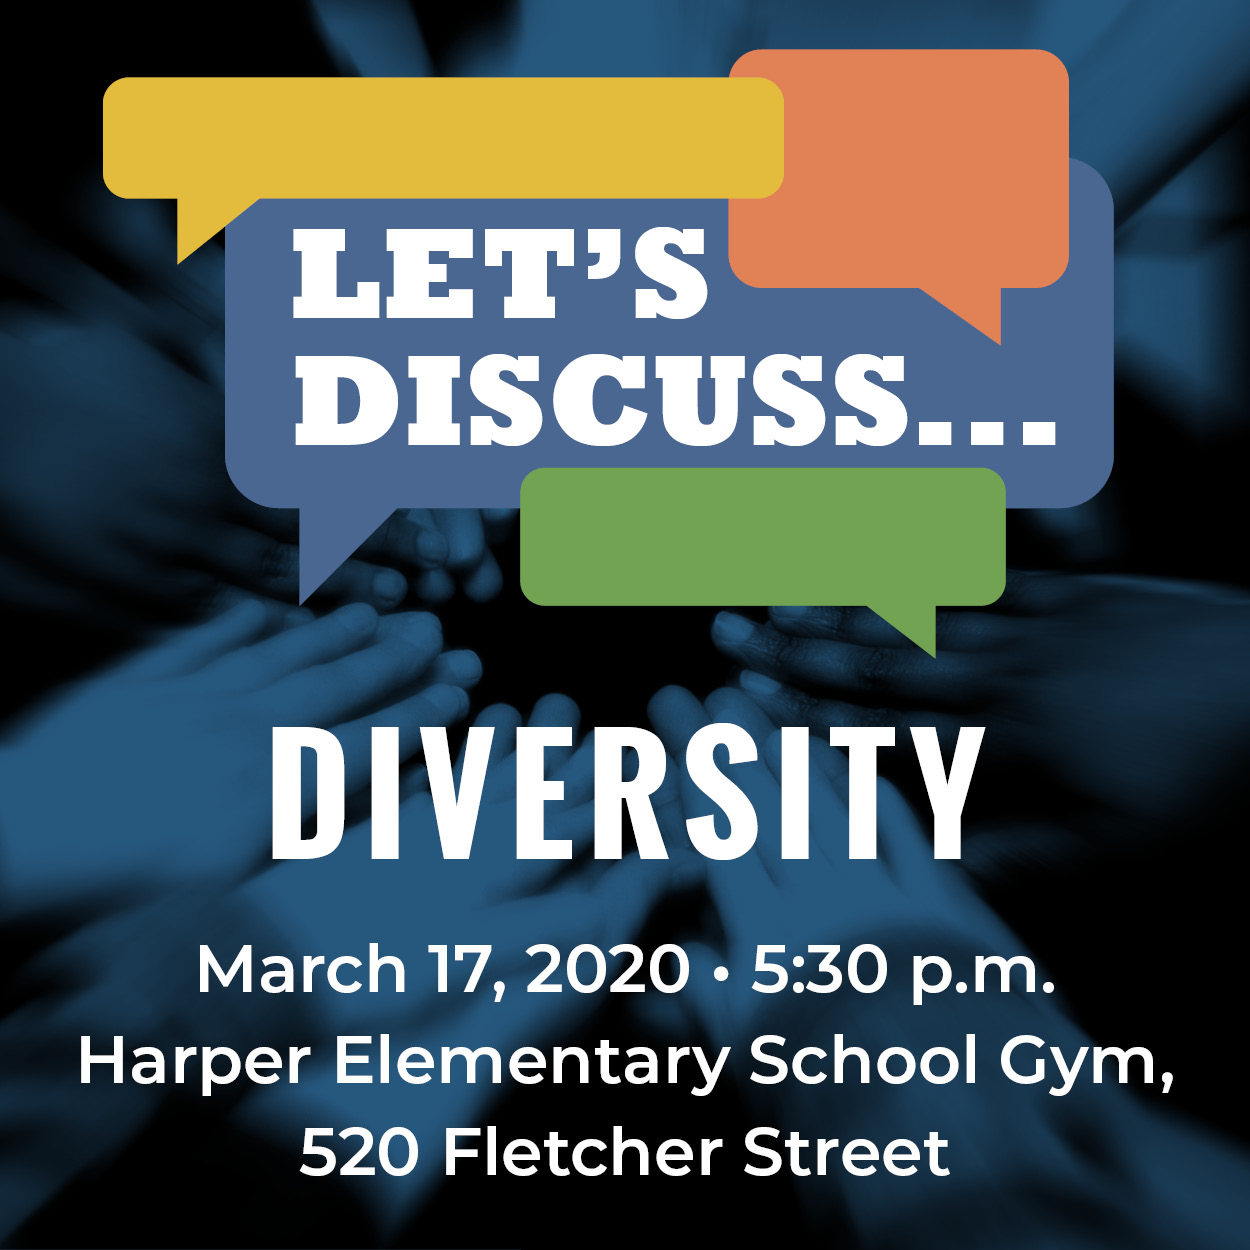 Photo for CITY OF THOMASVILLE PRESENTS &lsquo;LET&rsquo;S DISCUSS&hellip;&rsquo; AIMED AT DIVERSITY